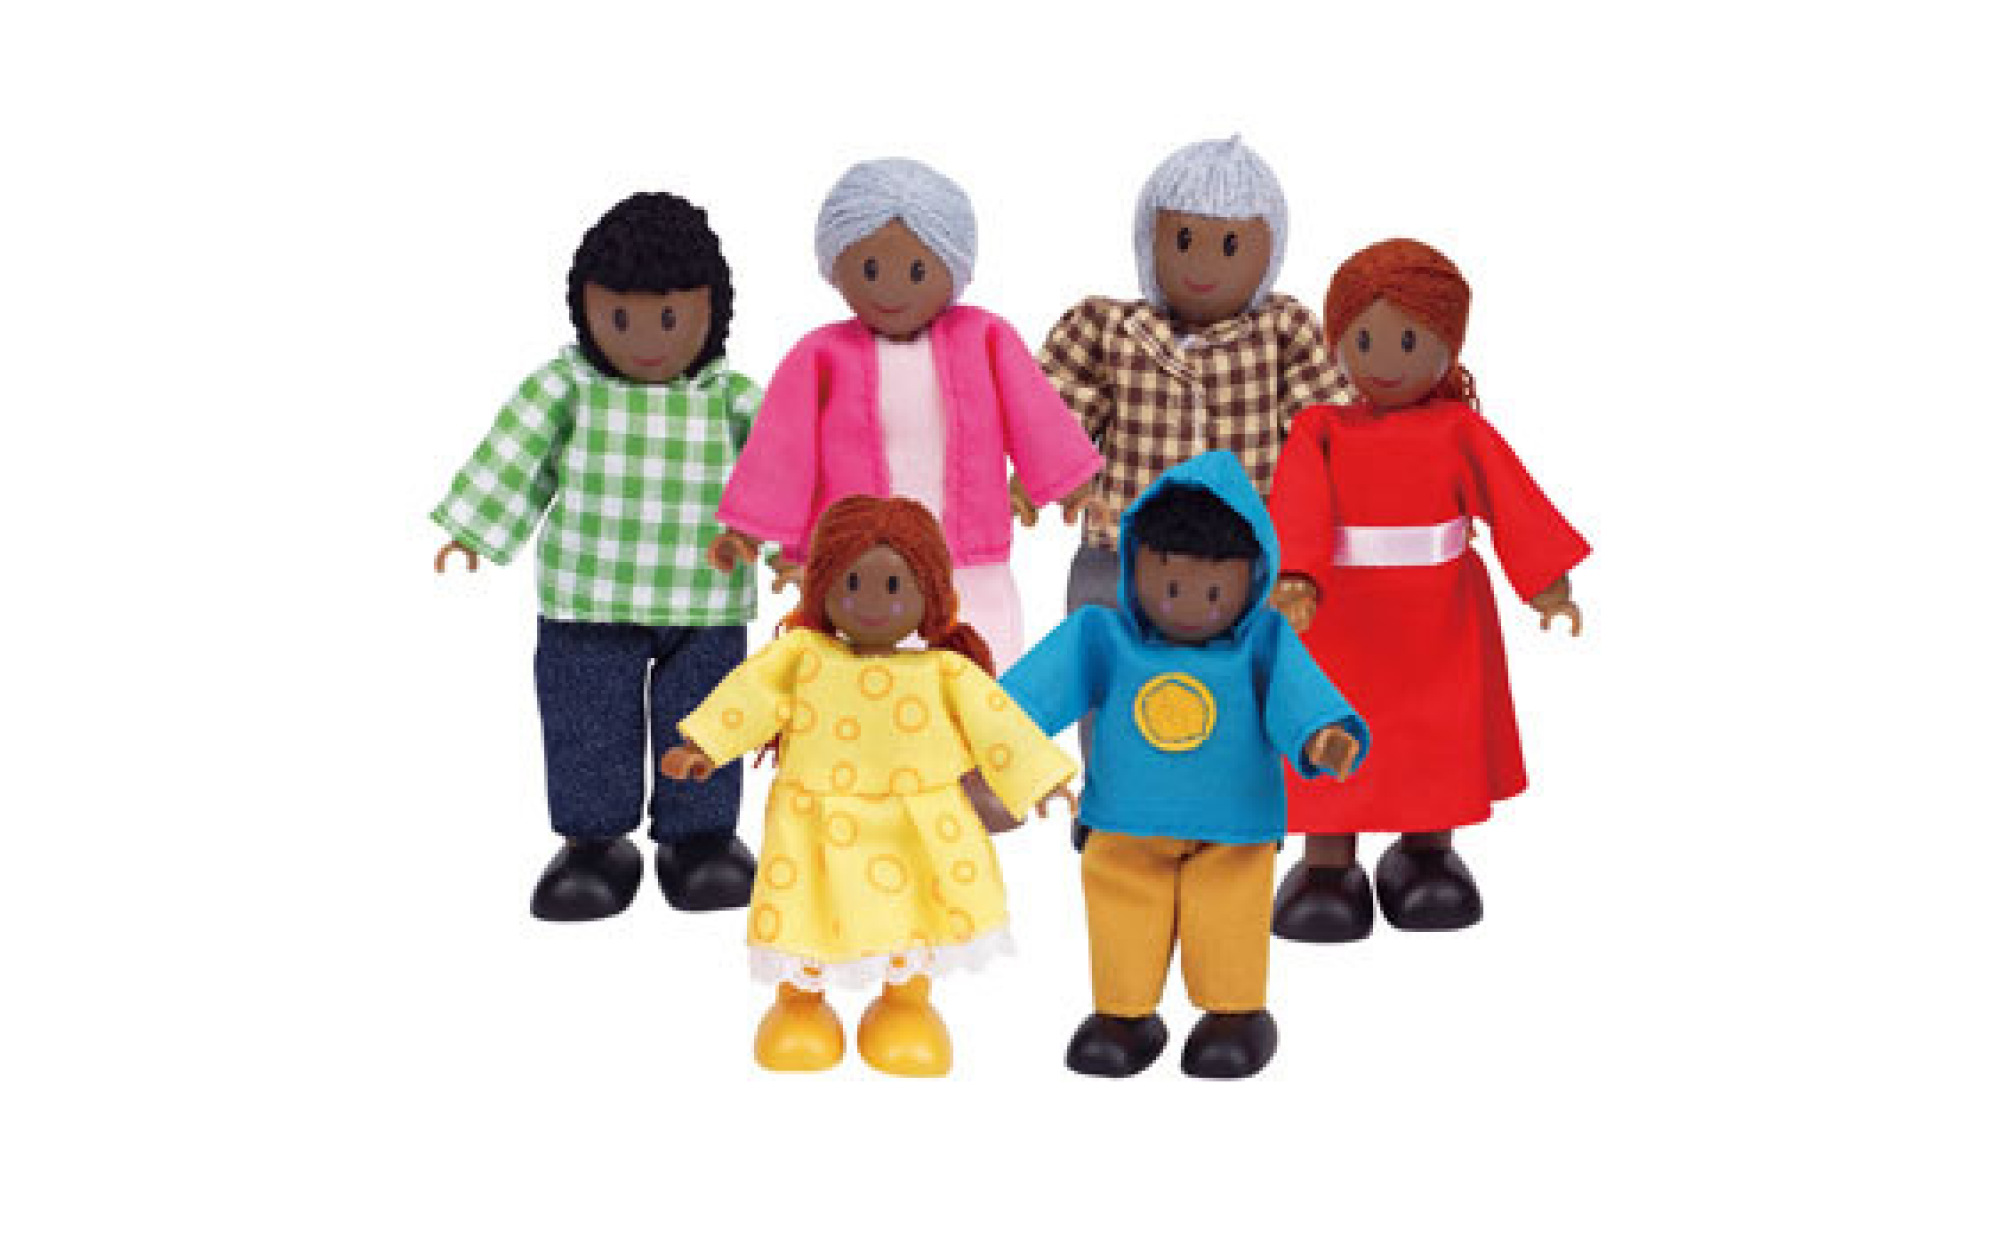 Wooden Doll House Family Dress-up Characters Grandpa Wooden Dollhouse People Grandma Mom Dad 6 Family Figures Miniature Doll House Boy and Girl 